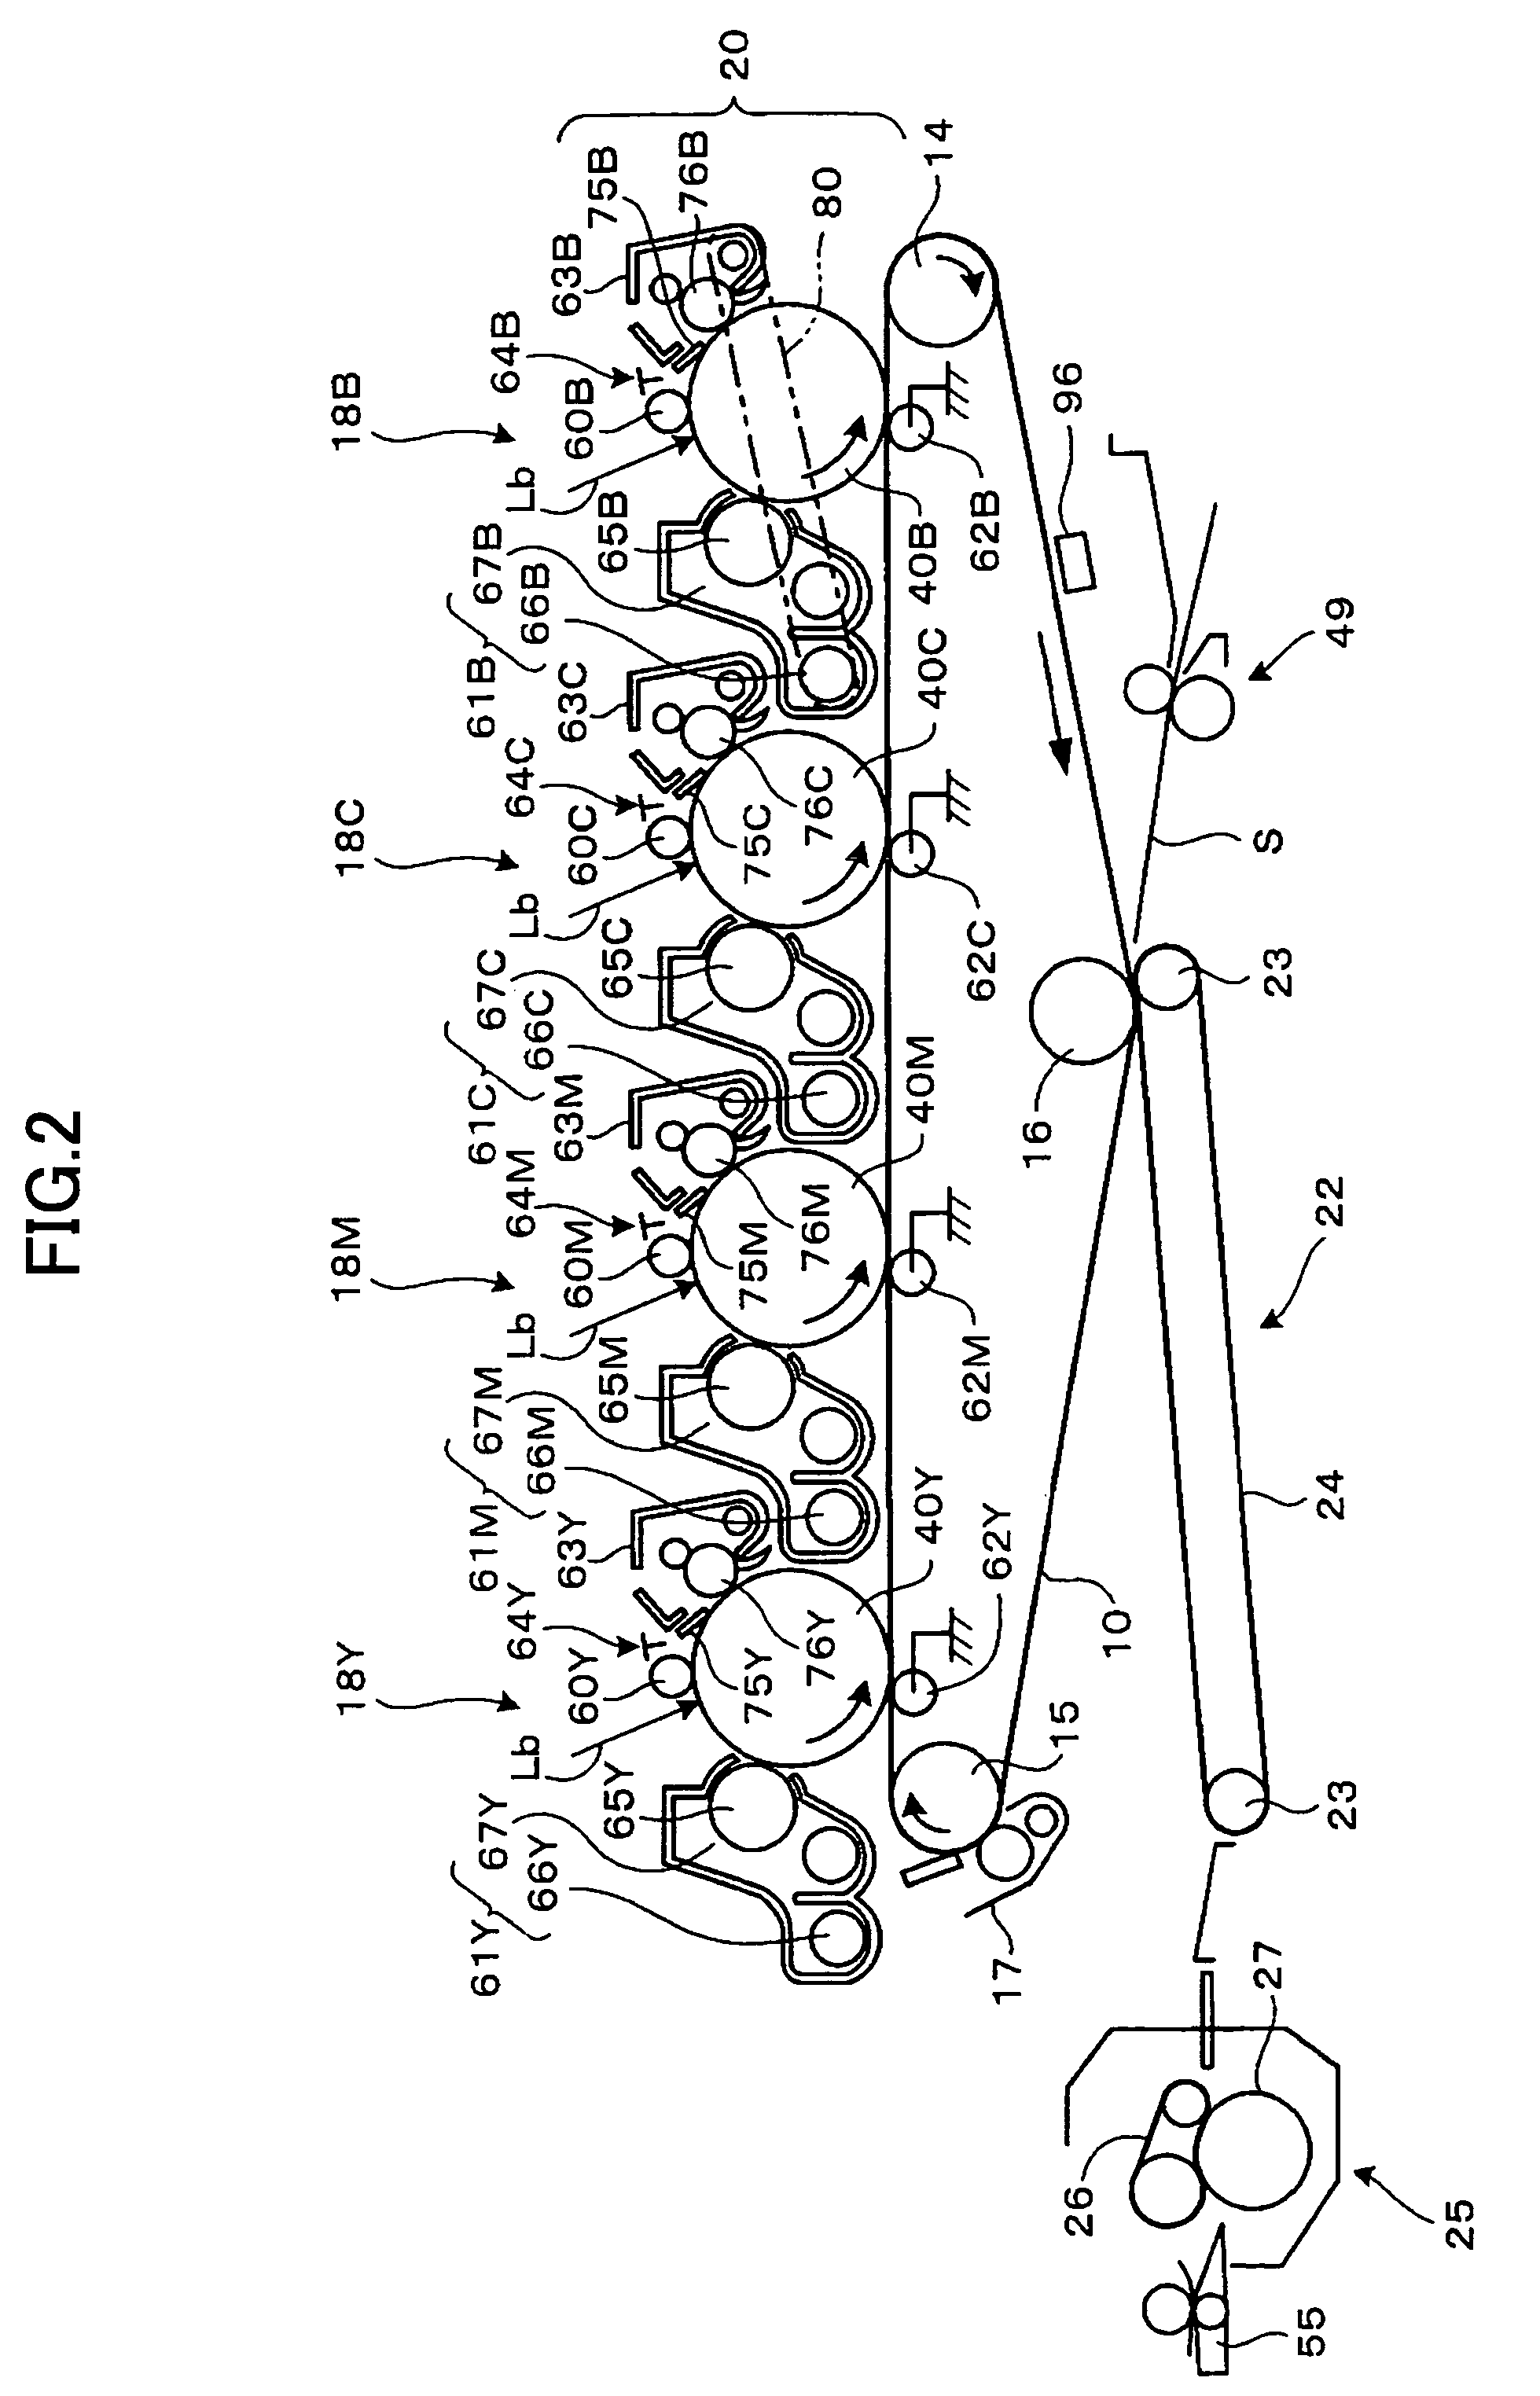 Position deviation detecting method and image forming device